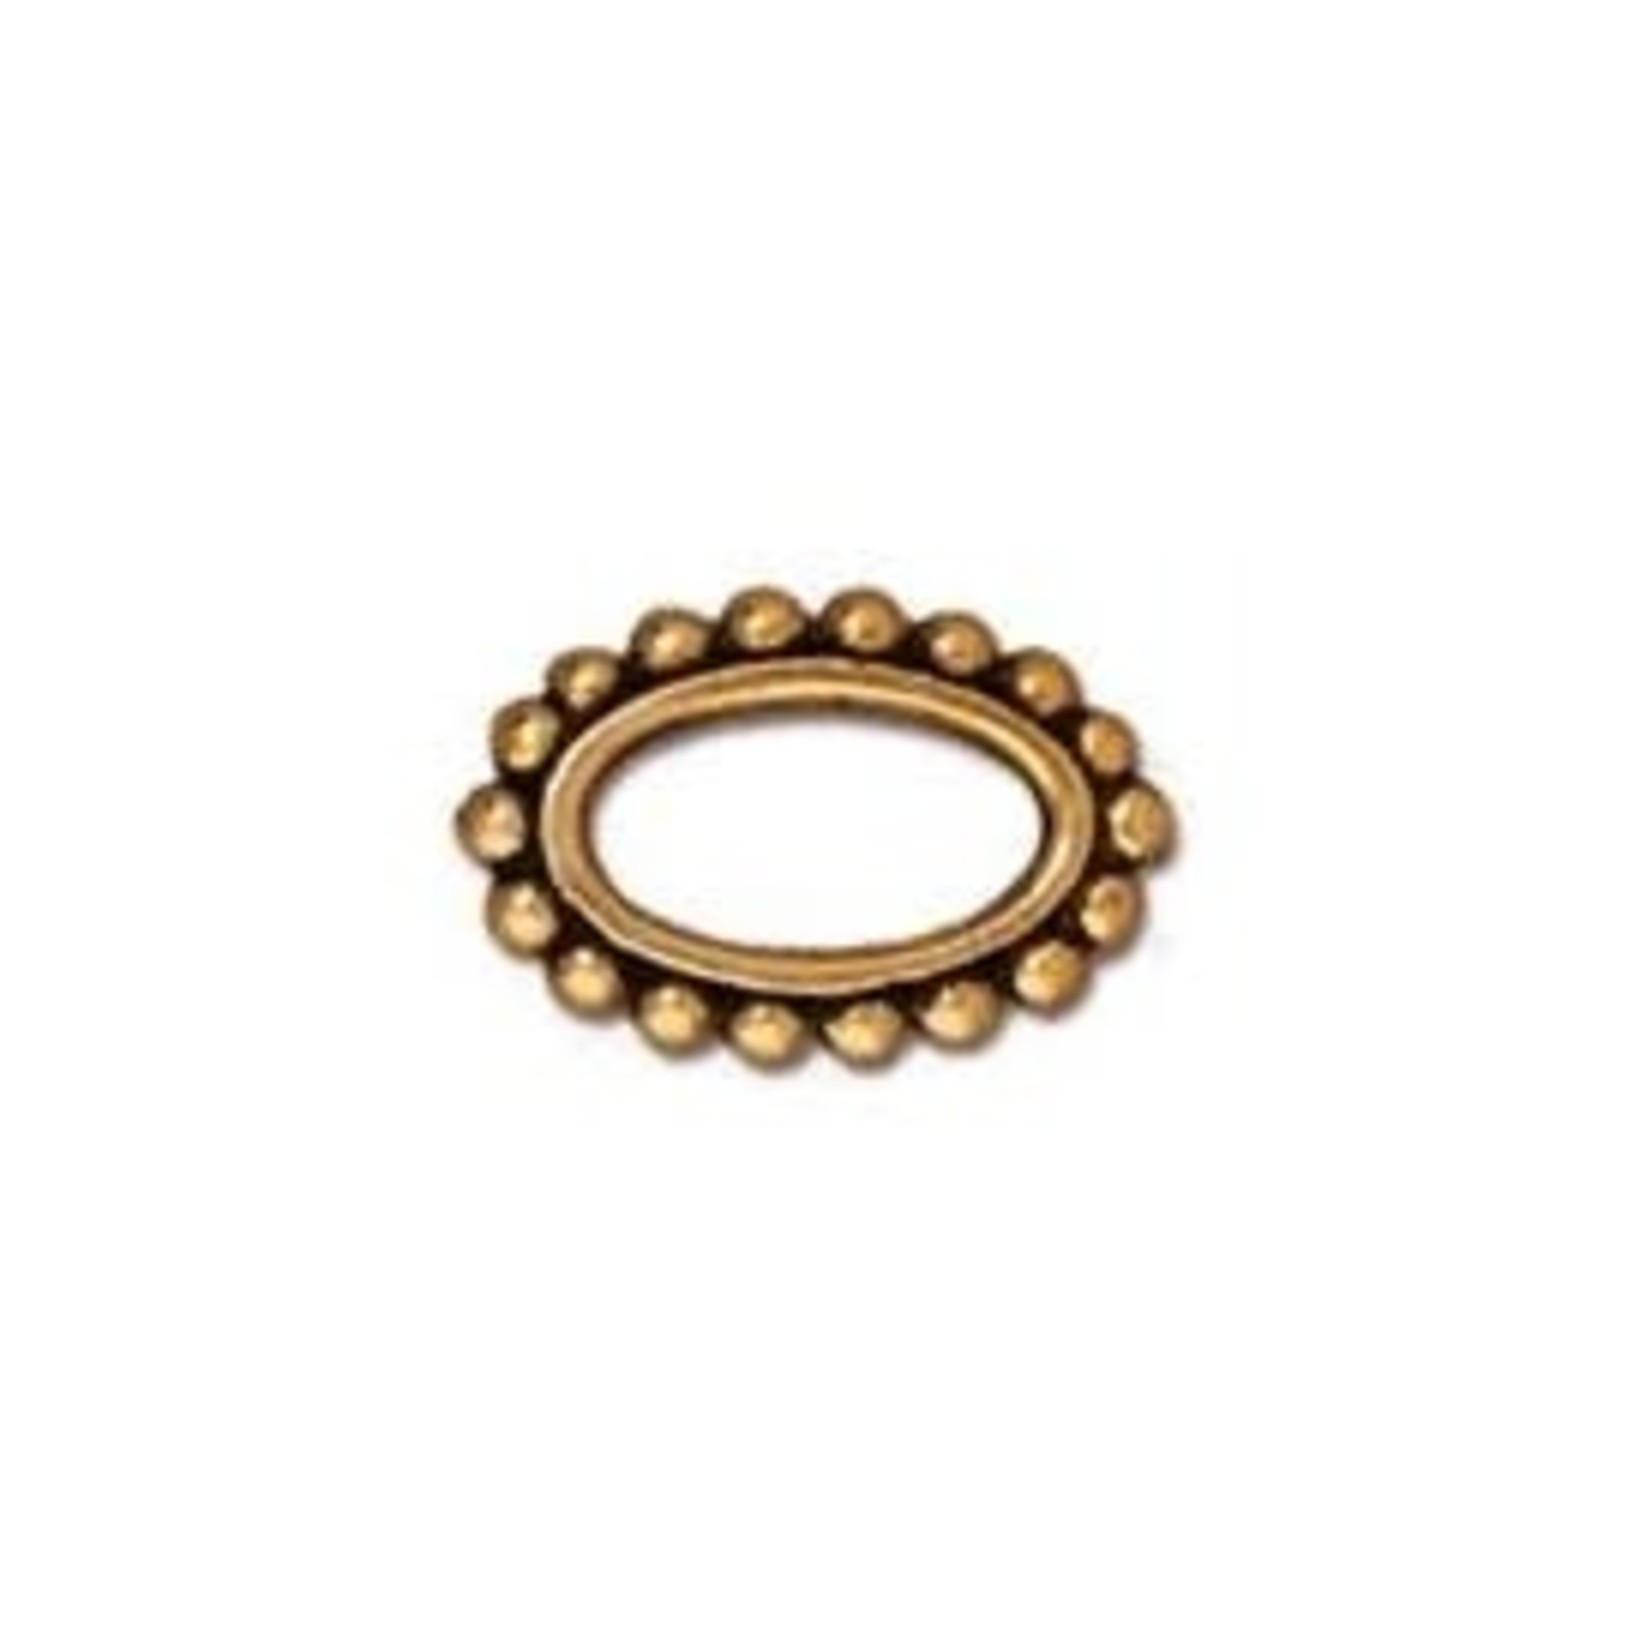 TierraCast Oval Beaded Ring - Antique Gold Plated